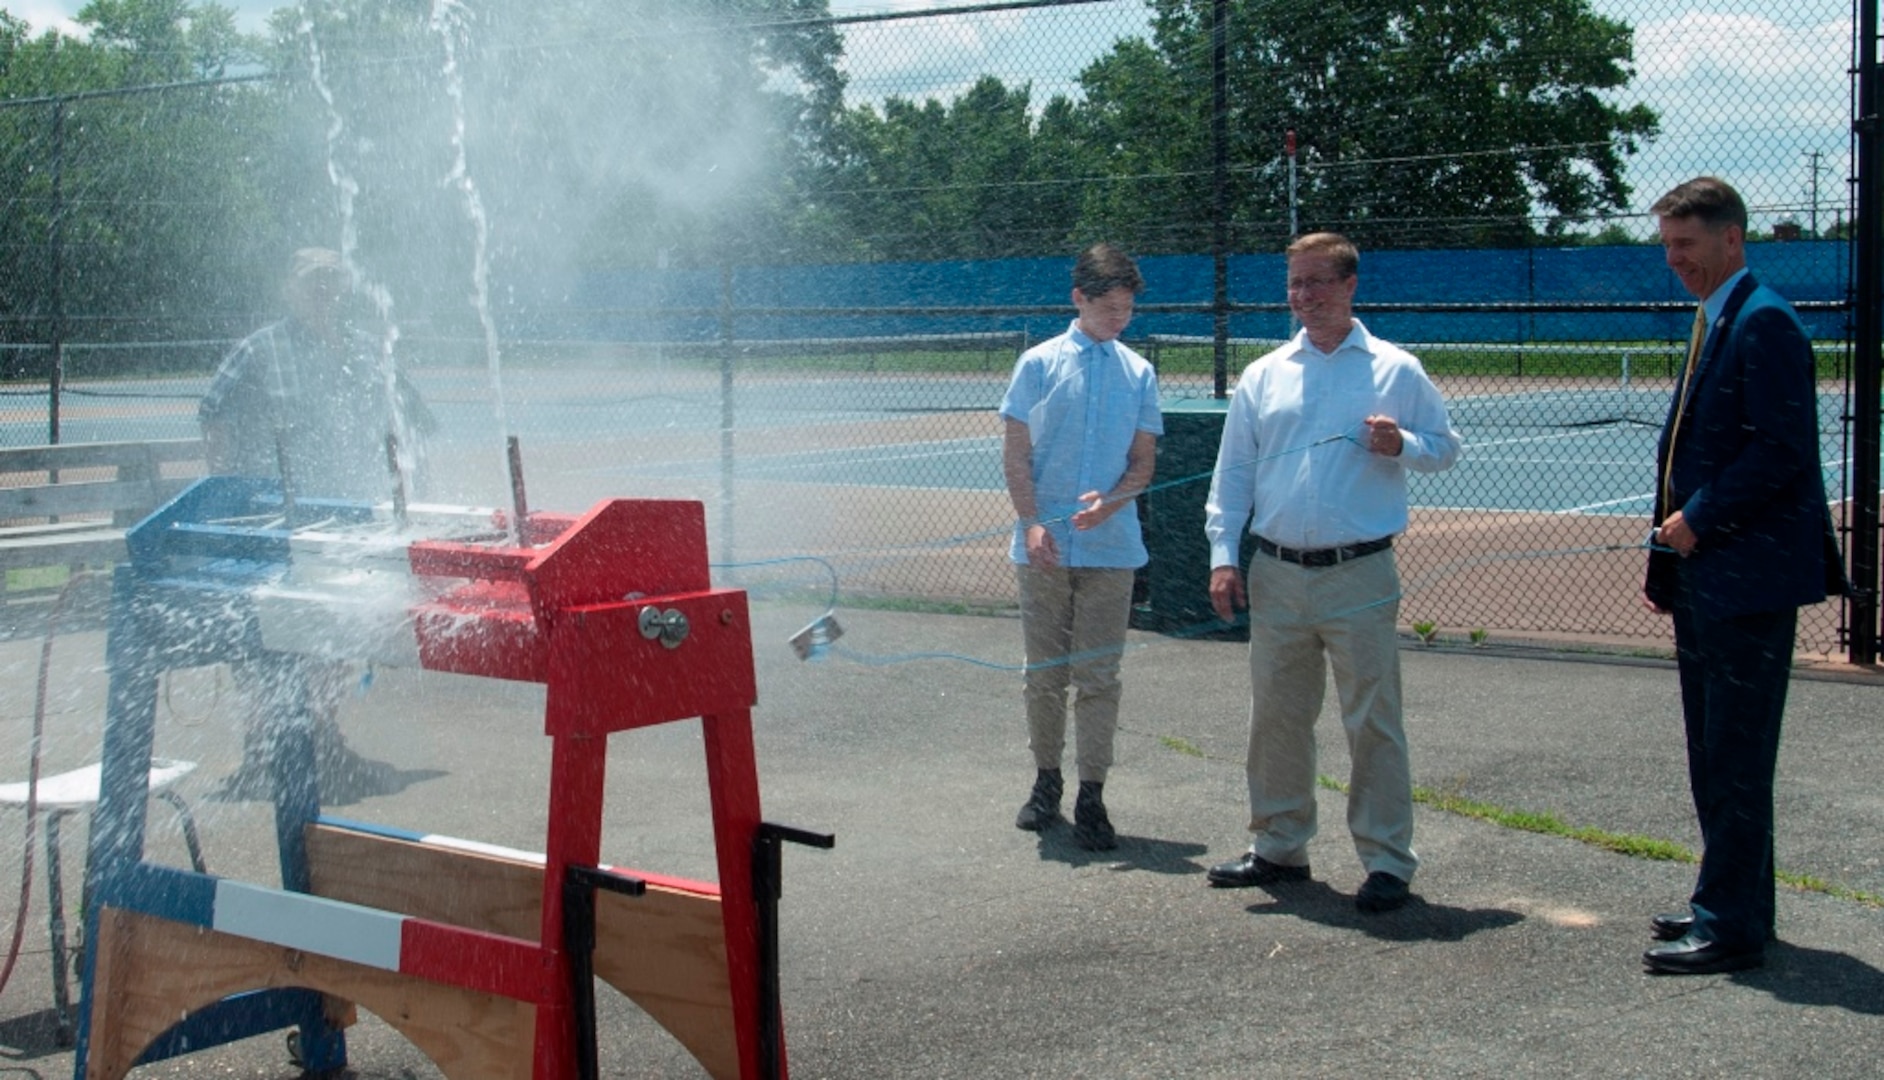 IMAGE: KING GEORGE. Va. (June 25, 2018) - Rep. Rob Wittman (R-Va.) fires a water rocket with a middle school student and a Navy scientist-mentor at the 2018 STEM Summer Academy sponsored by Naval Surface Warfare Center Dahlgren Division. The water rockets were constructed and calibrated by students in conjunction with an aerospace engineering activity. The teachers and mentors inspired students to develop their teamwork and problem-solving skills in math and science throughout the camp.